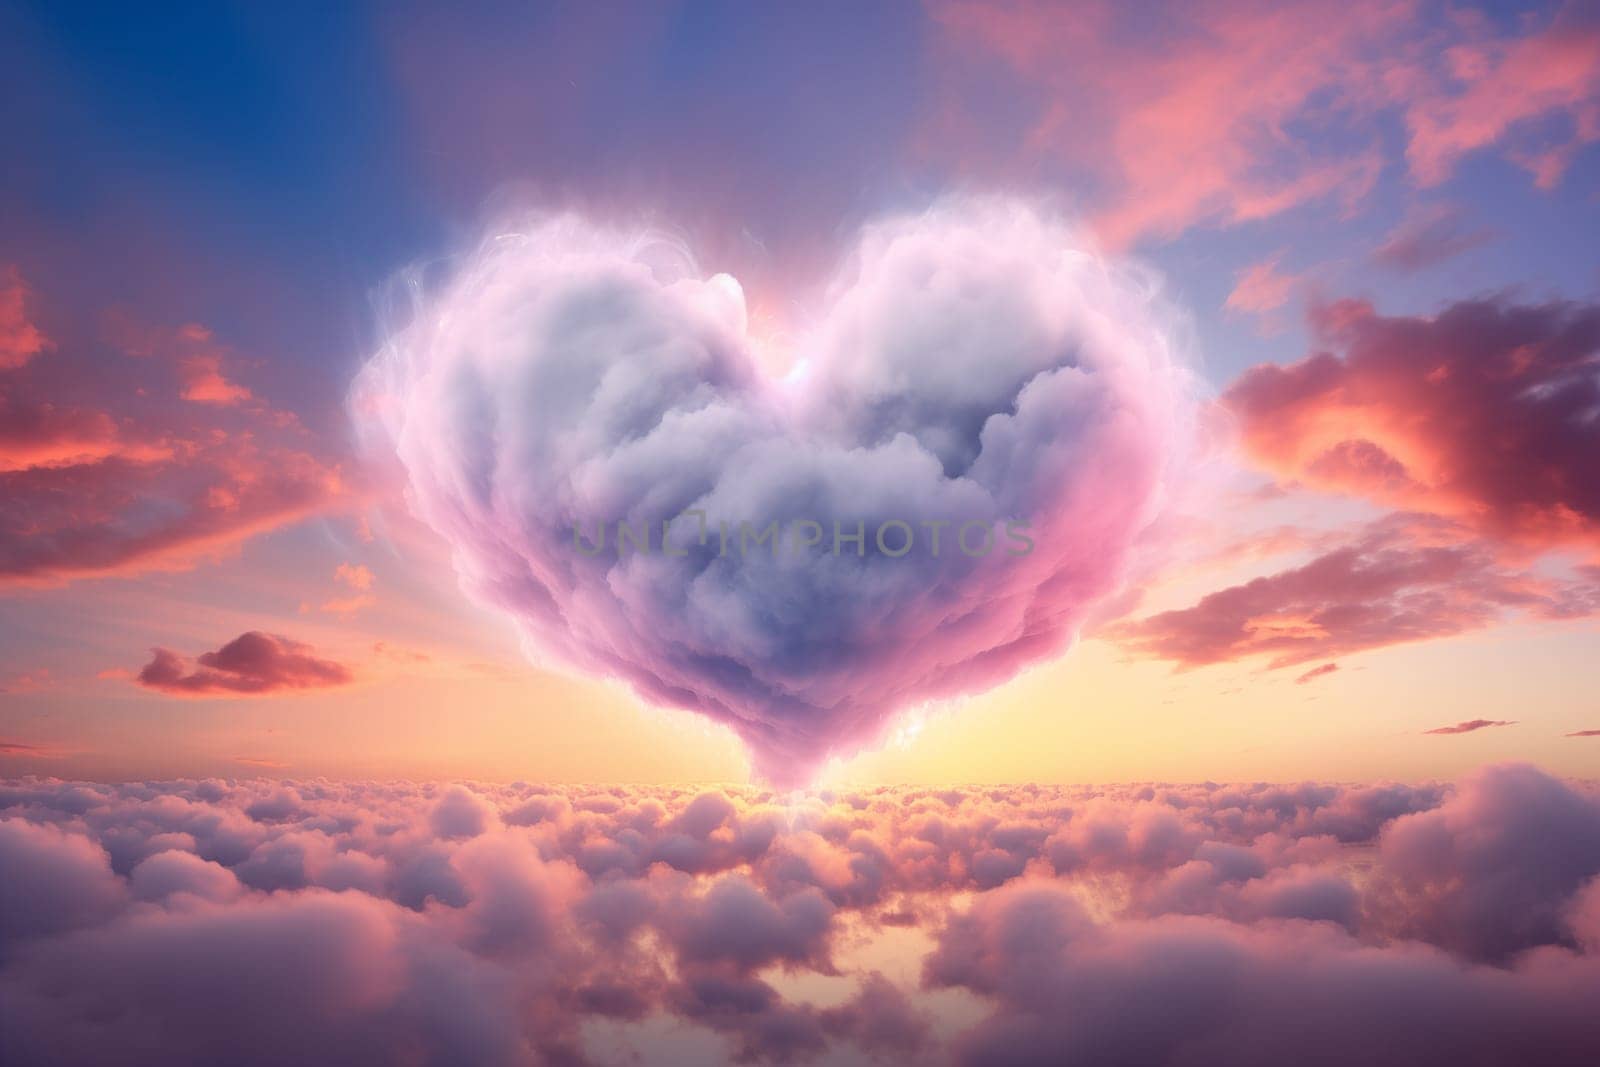 Heart-Shaped Cloud at Sunset Painting by dimol